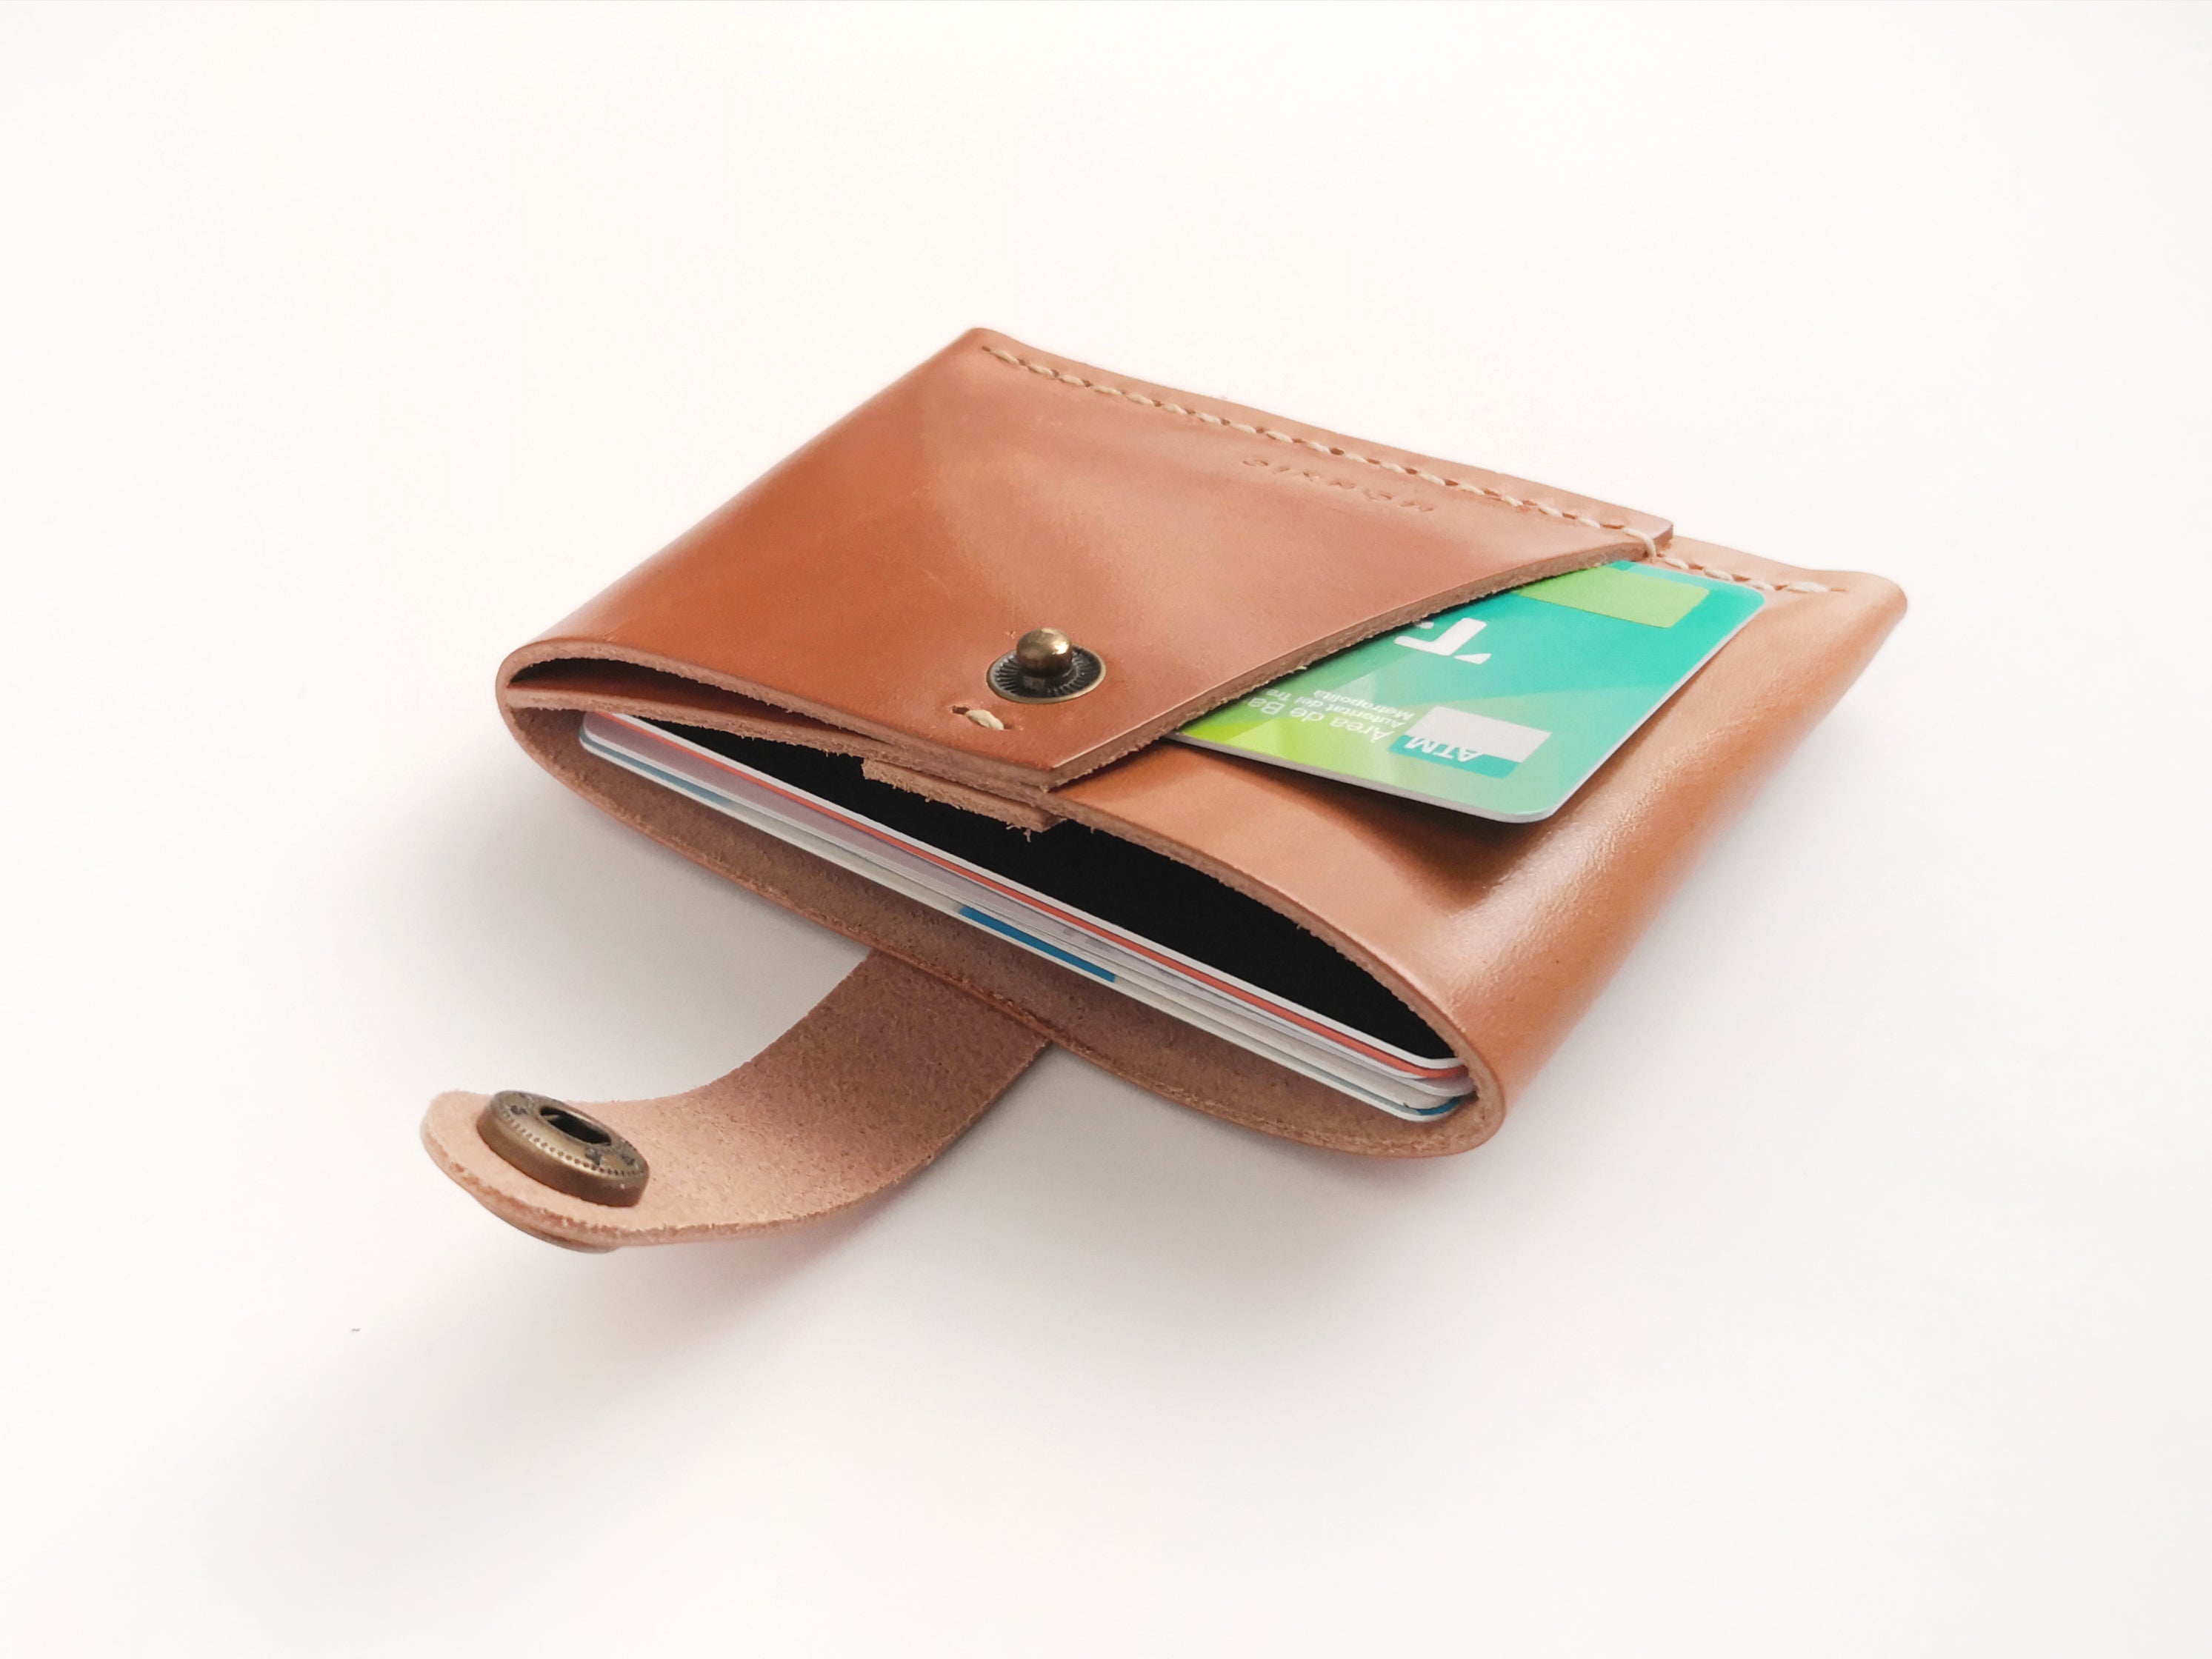 Pull-out Cardholder T_Honey Brown